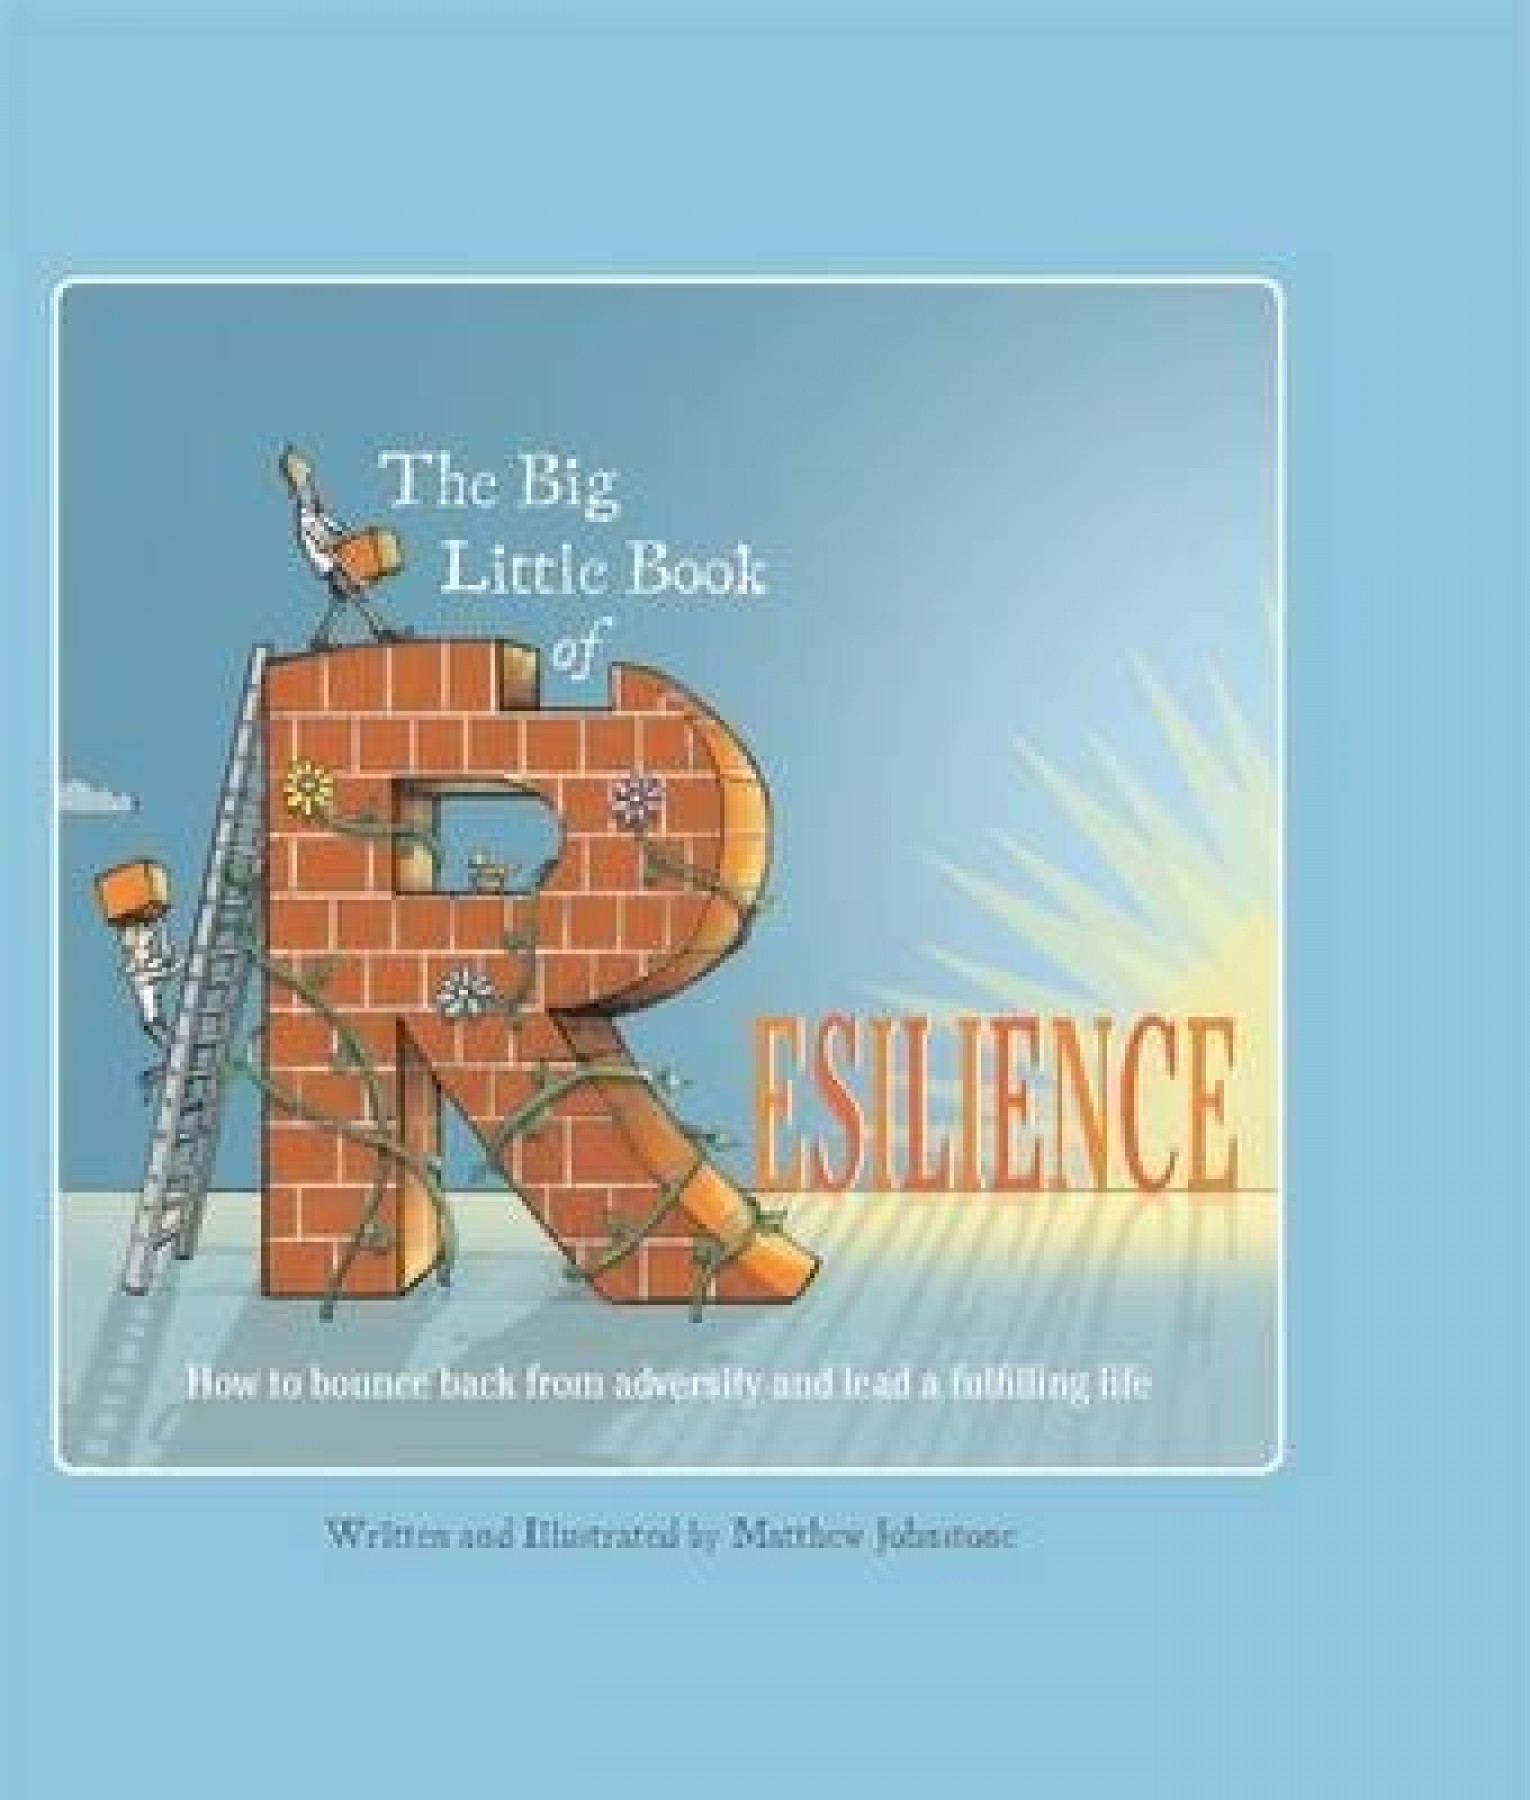 The big little book of resilience: How to bounce back from adversity and lead a fulfilling life